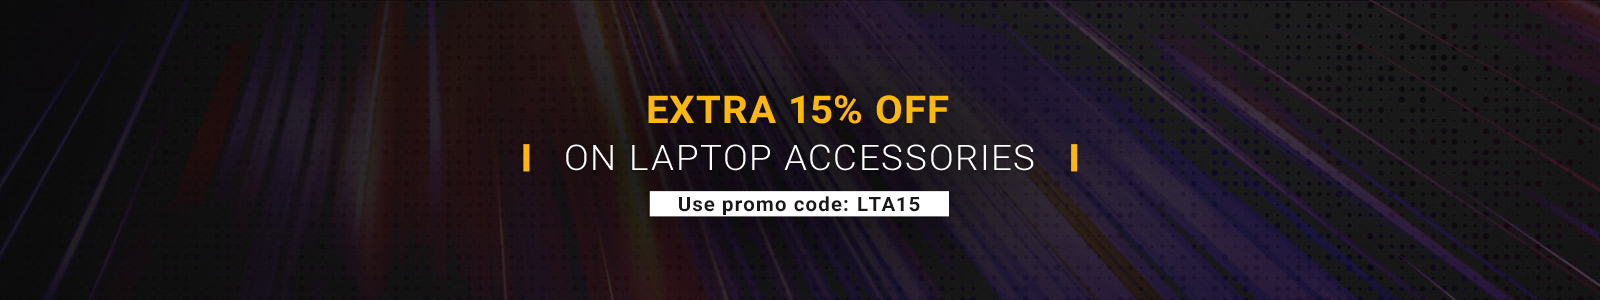 Extra 15% off on Laptop Accessories
Use promo code: LTA15
Shop Now